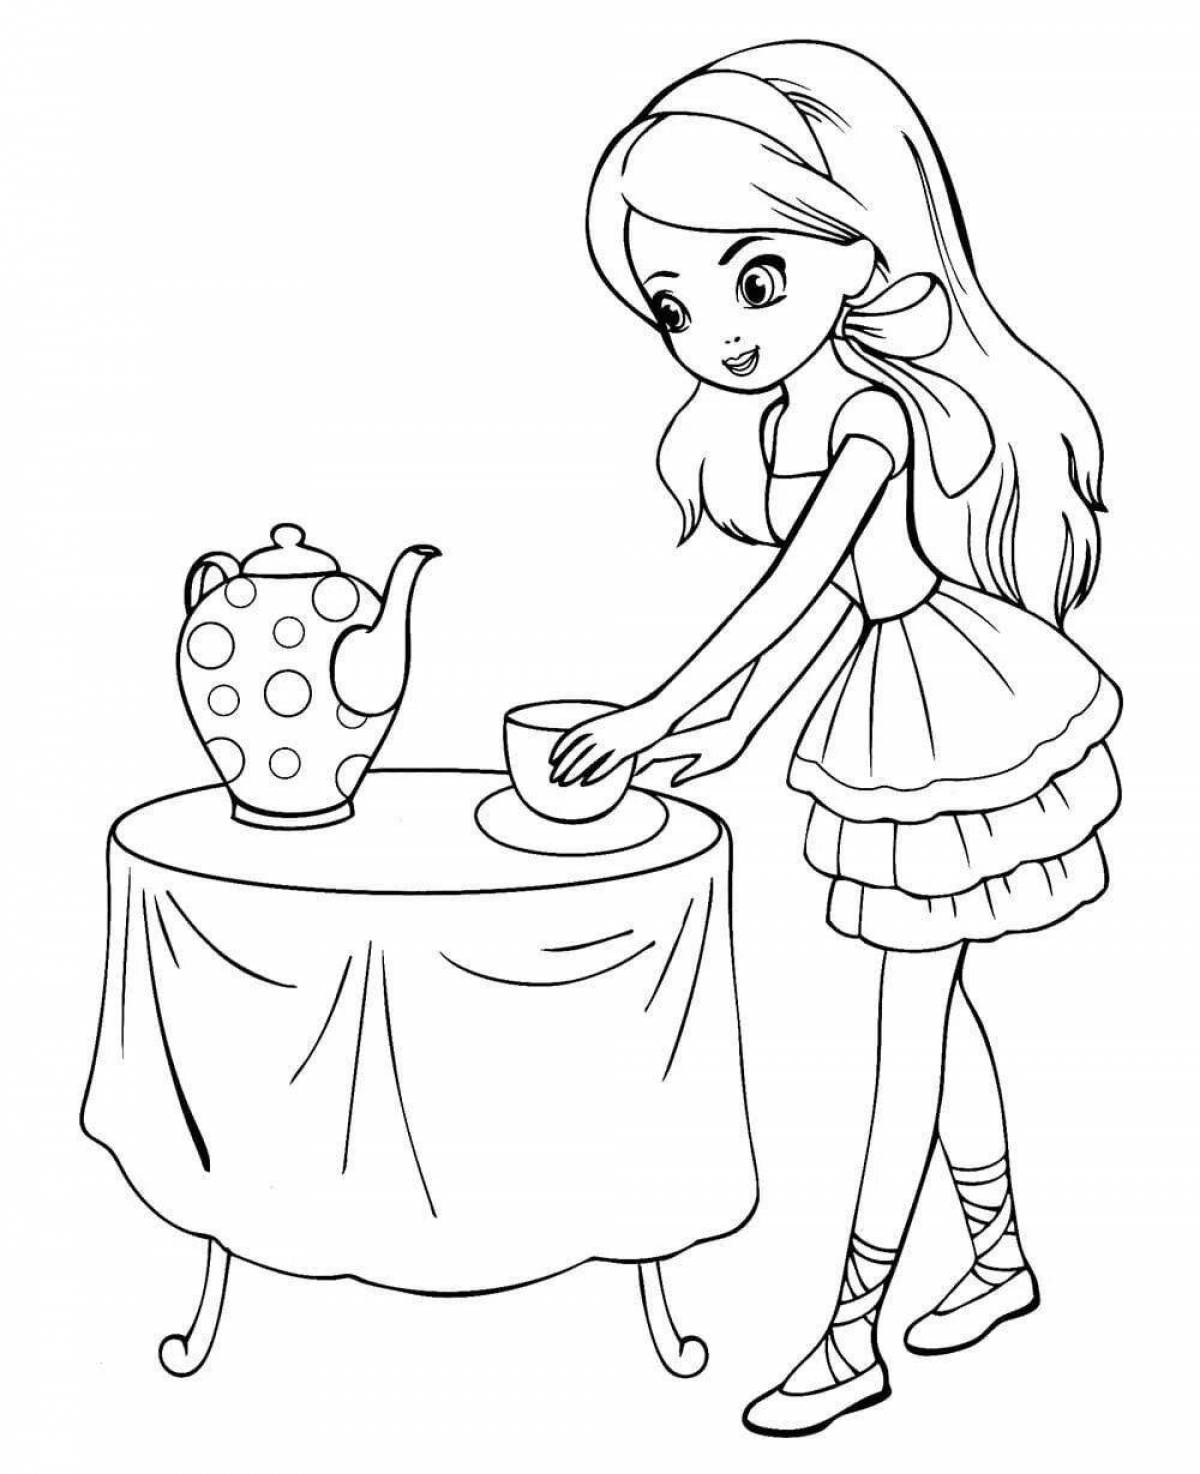 Great coloring book for girls pdf